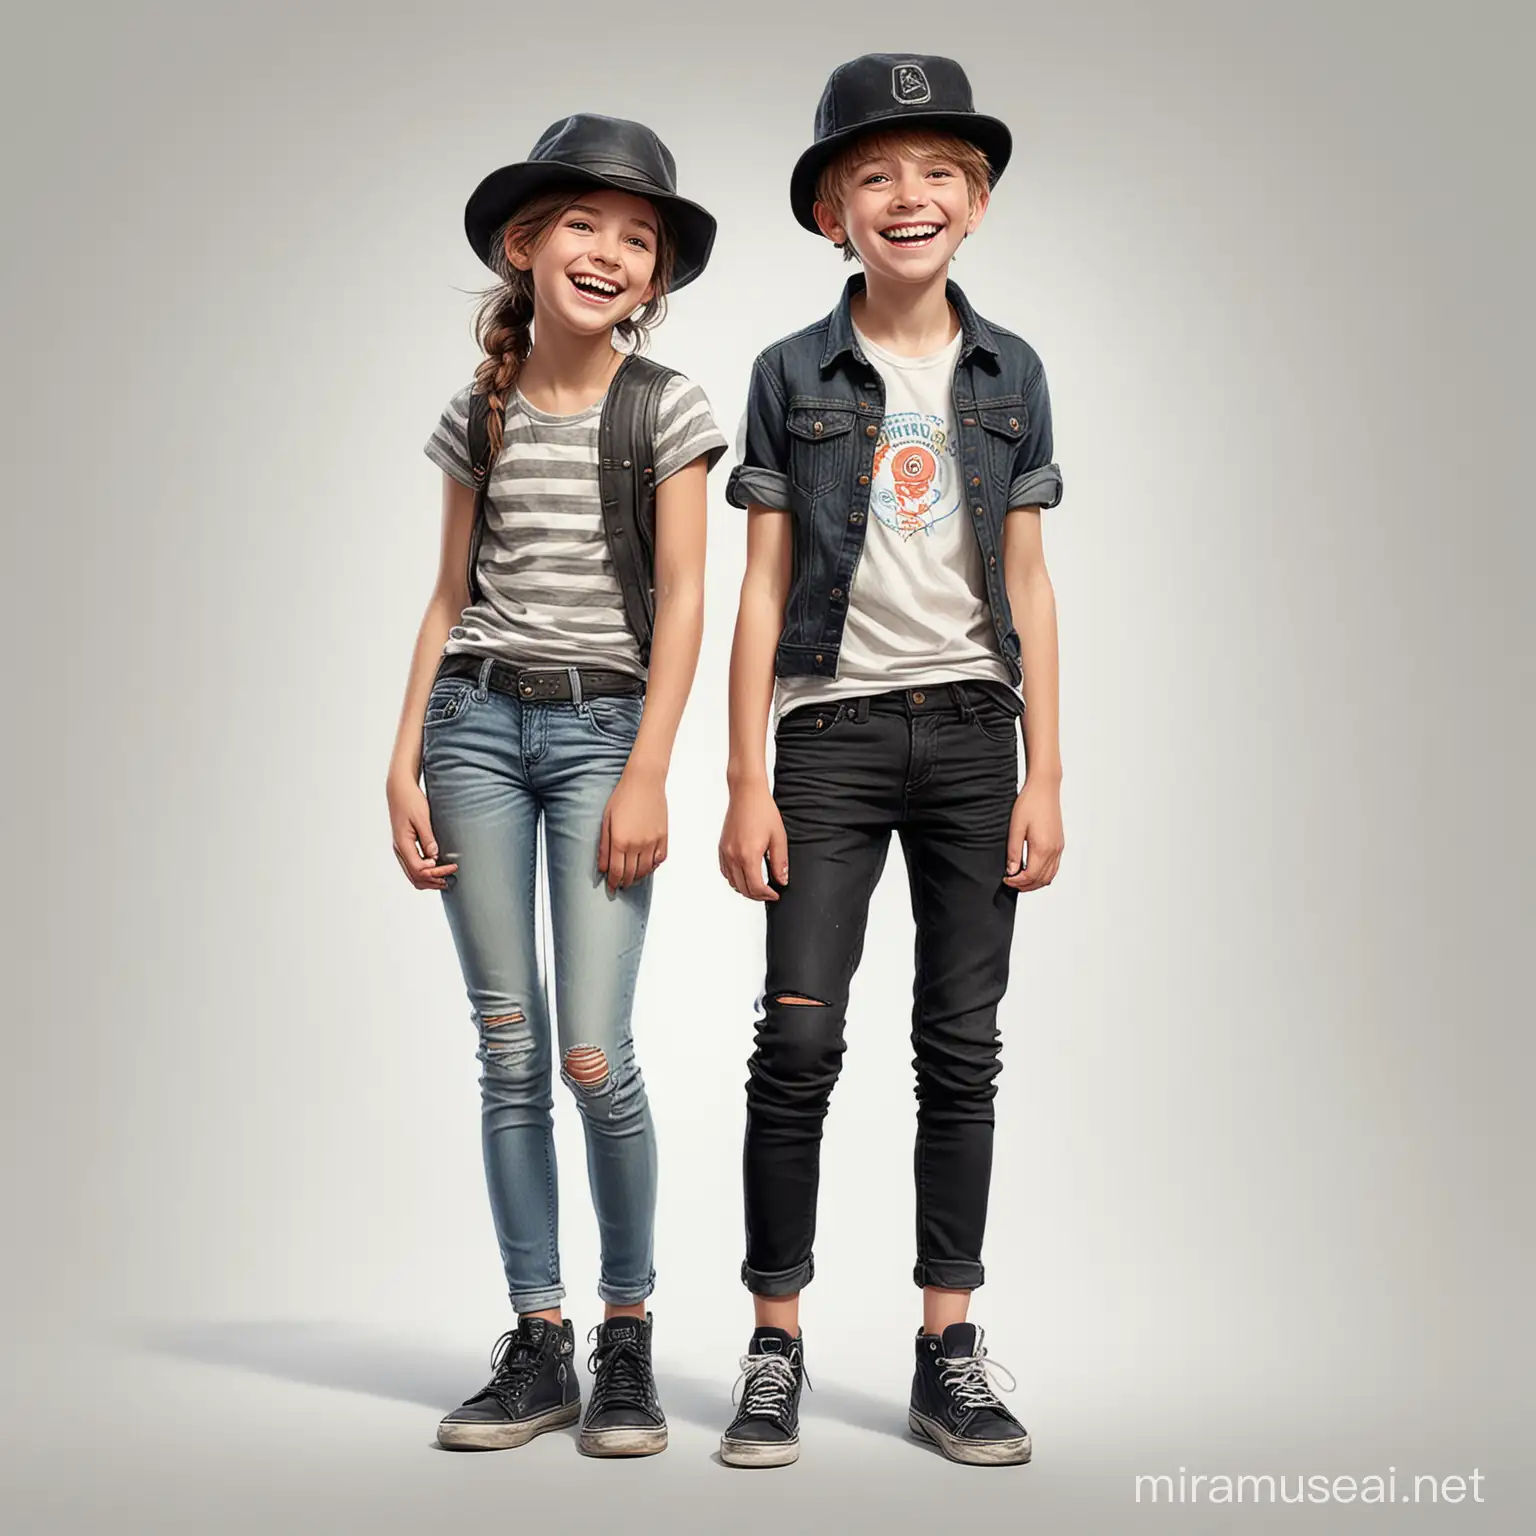 Laughing Girl and Boy in Black Jeans and Hats Cartoonish Inventive Character Designs